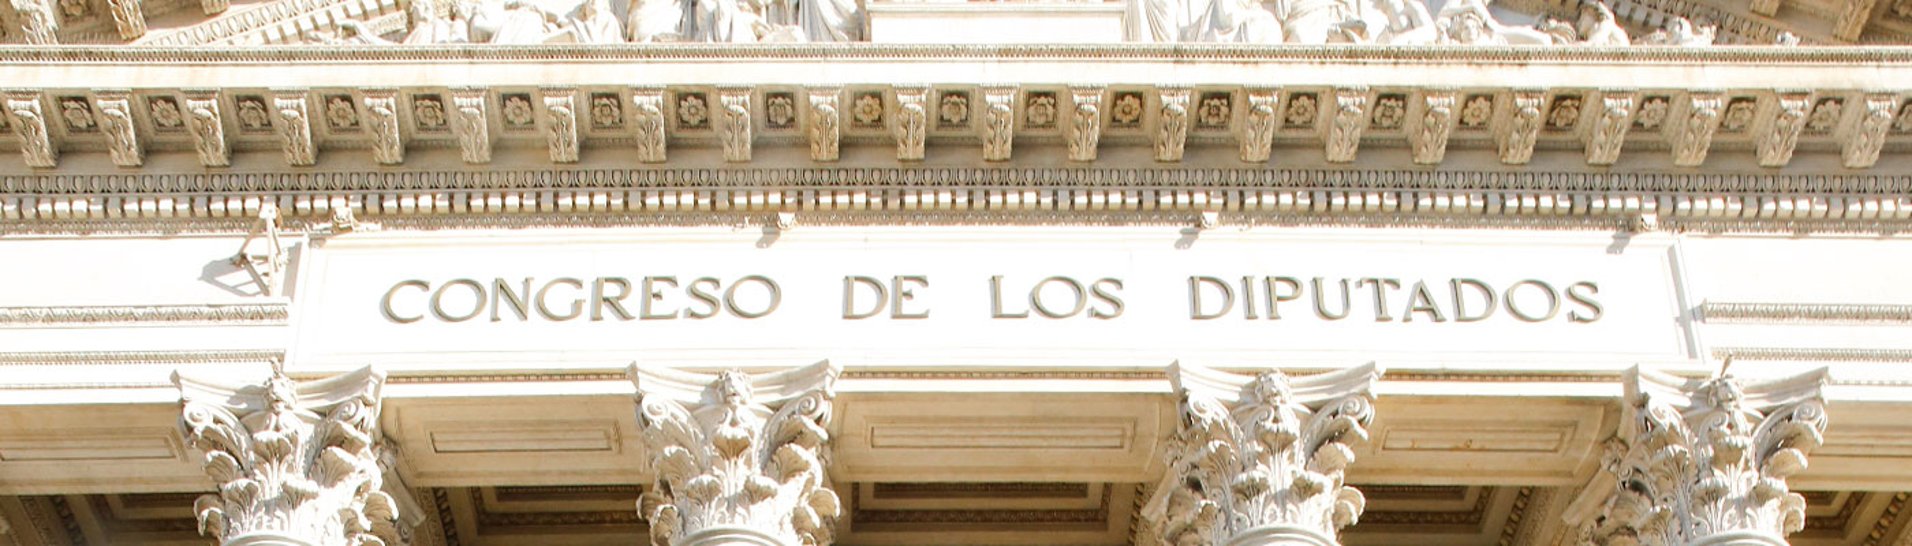 Spanish design has a historic day in the lower chamber of Spanish Parliament